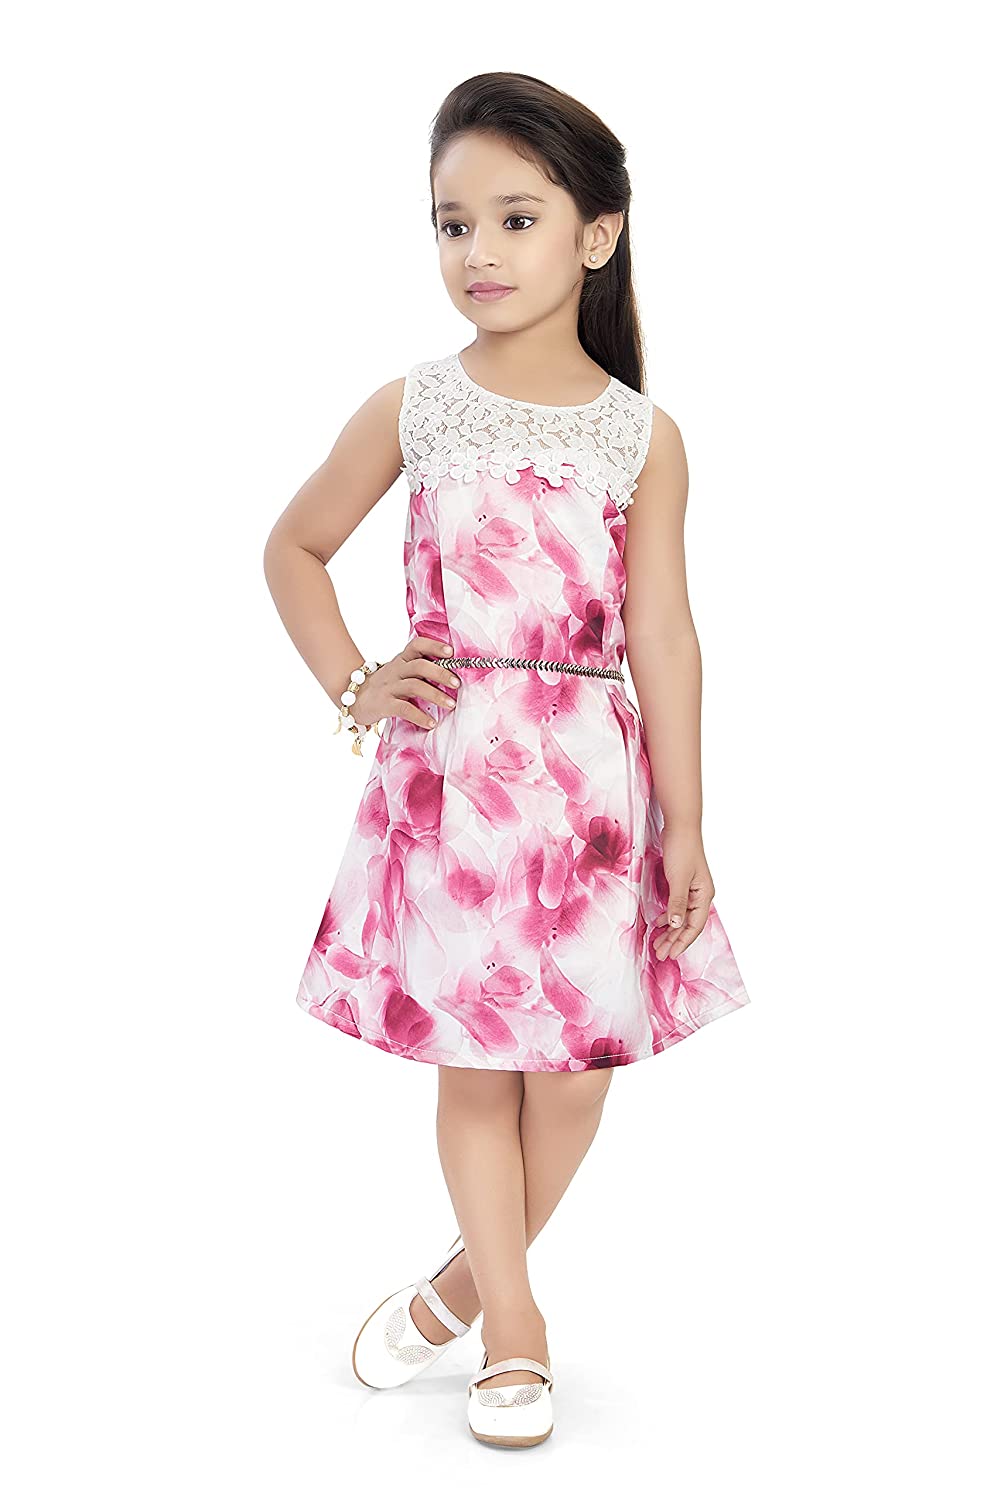 Pink Knee Length Blush Pink Childrens Dress With Applique Lace And Beading  For Weeding, Formal Pageants, And Special Occasions From Huifangzou, $93.12  | DHgate.Com